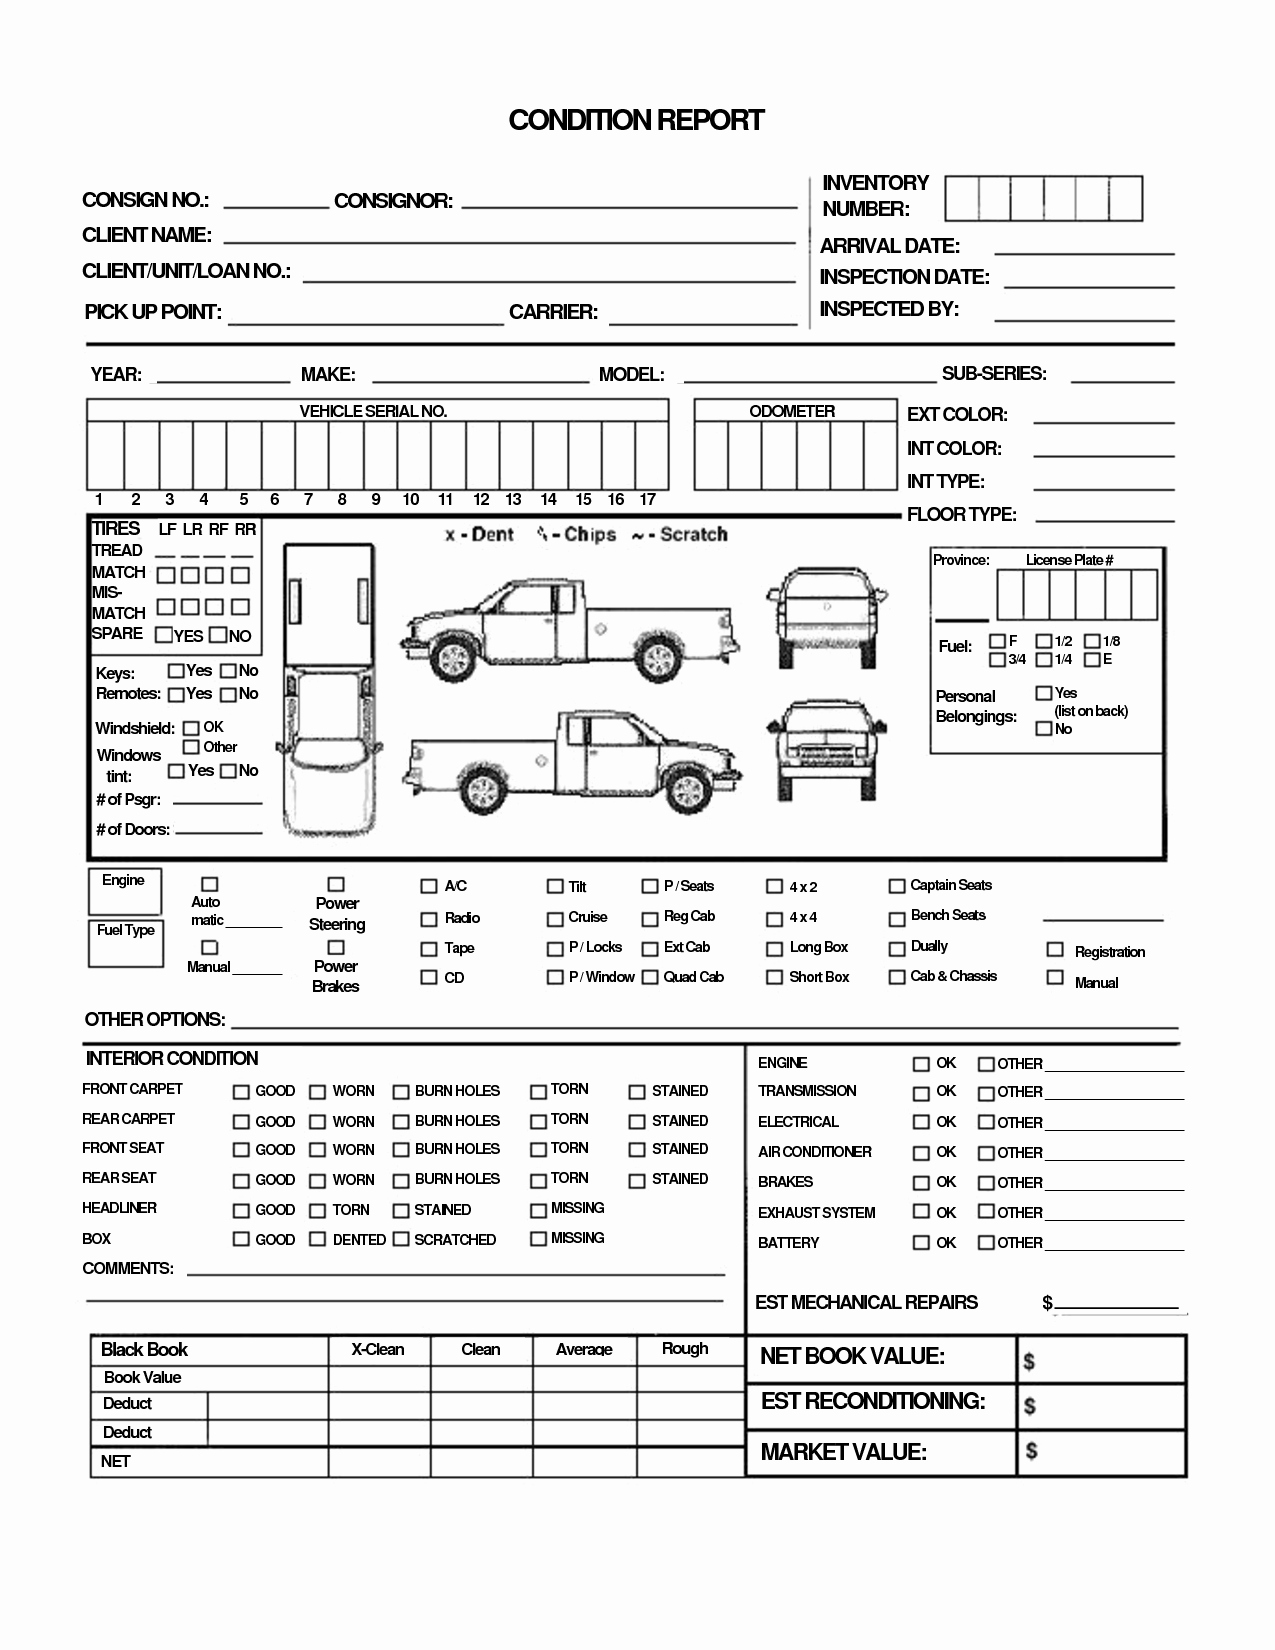 Vehicle Condition Report Template Fresh Car Condition Report Template